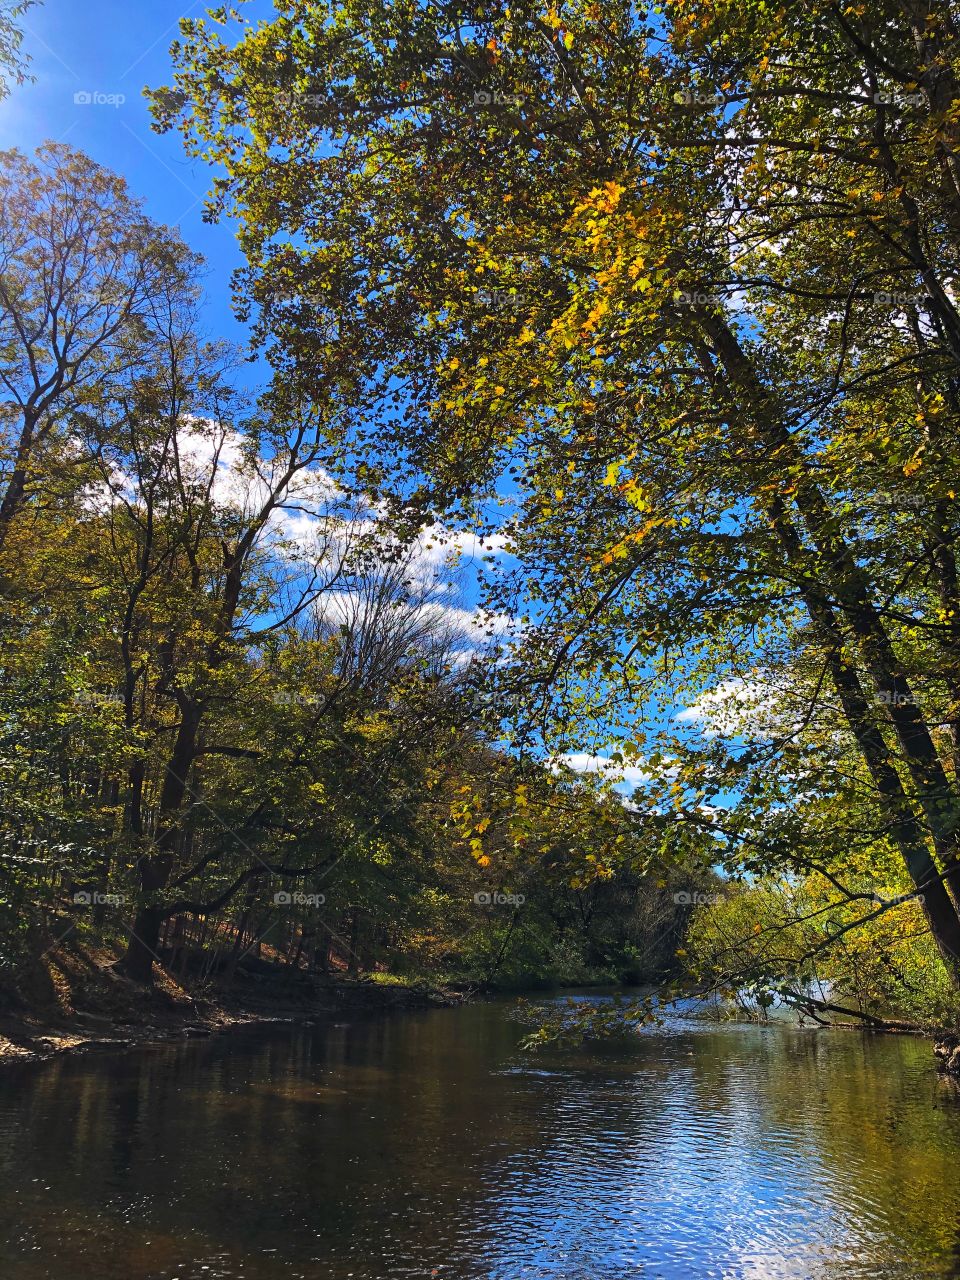 Blue skies and clouds over the creek